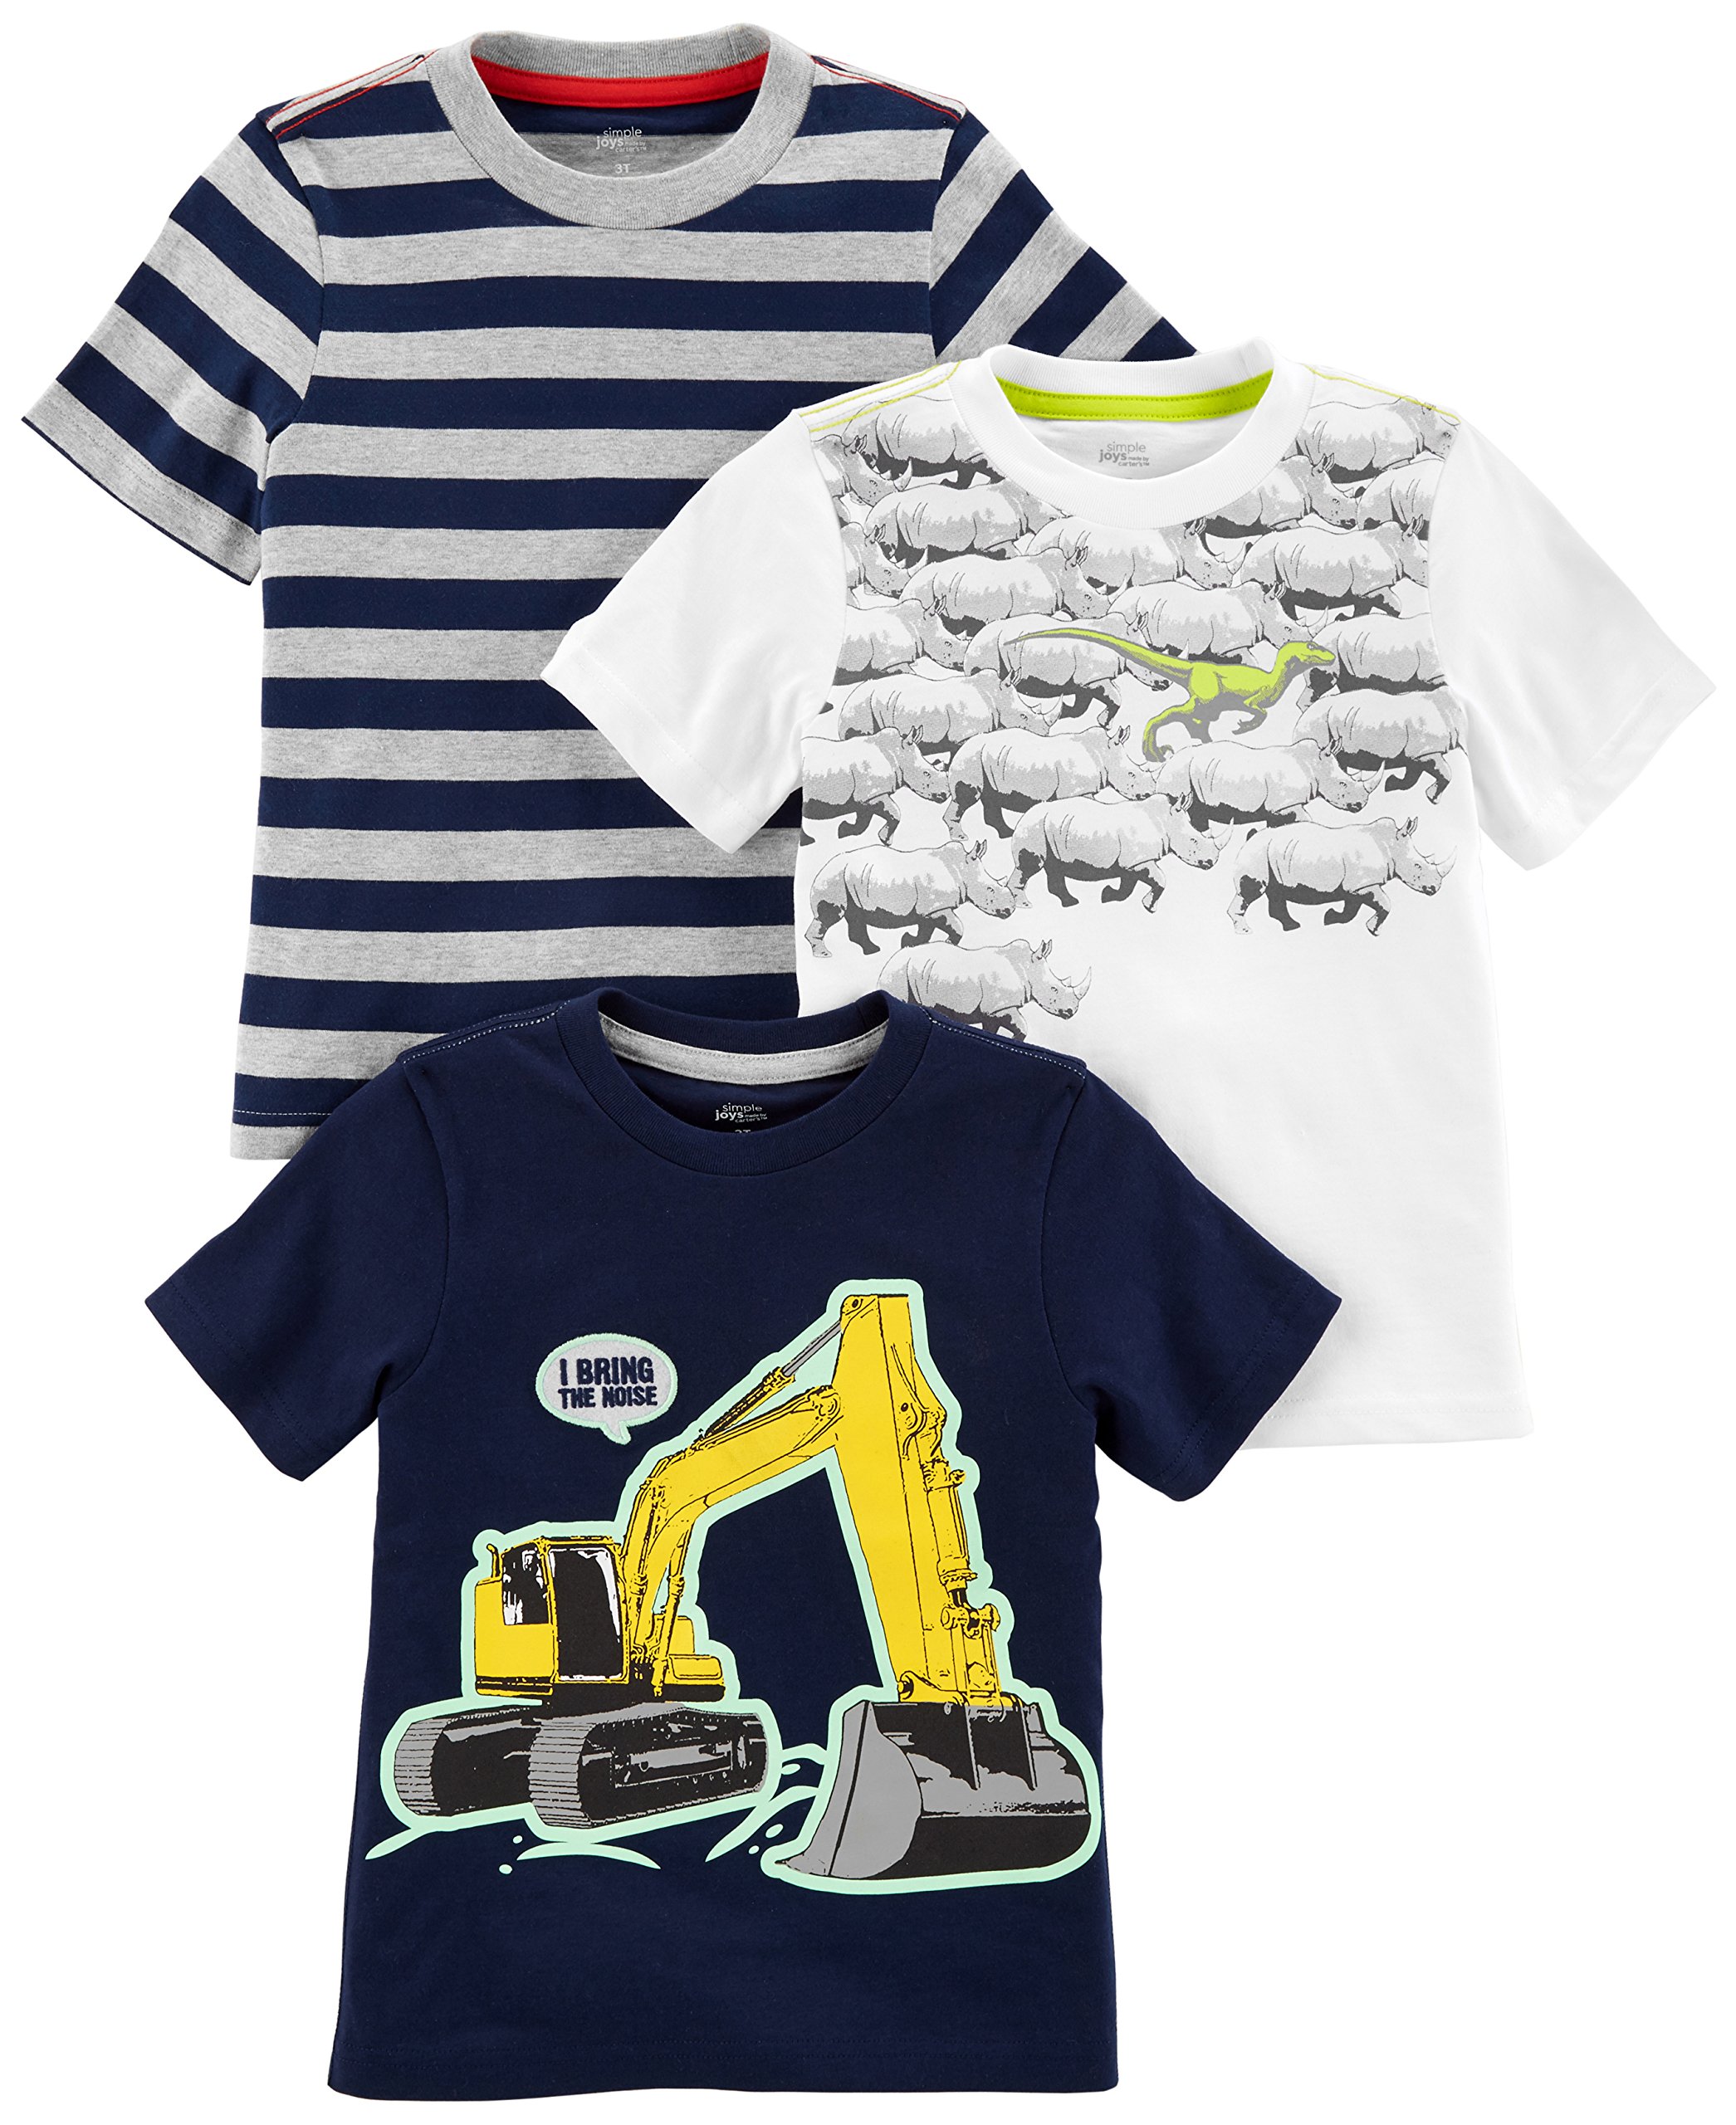 Simple Joys by Carter's Toddler Boys' Short-Sleeve Graphic Tees, Pack of 3